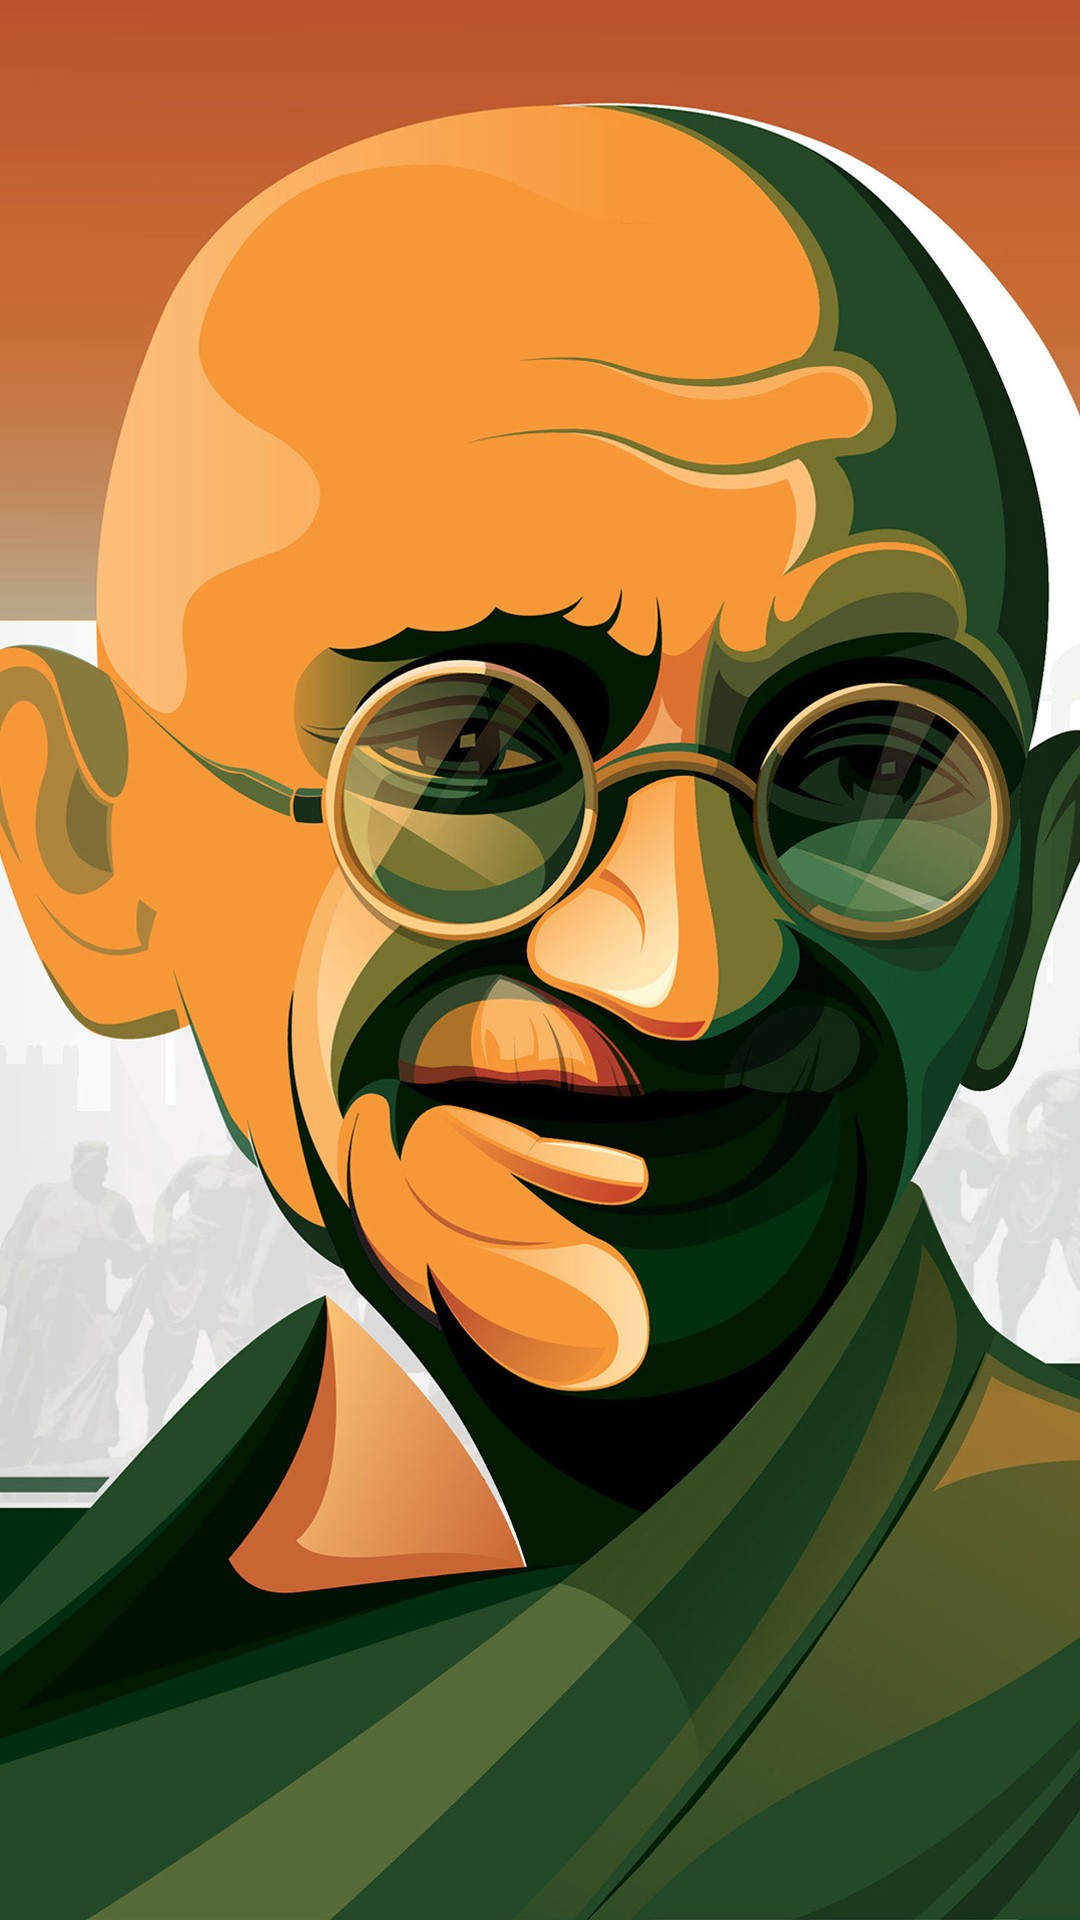 Mahatma Gandhi Pictures, Images, Photos, Wallpapers & Biography - #1  Fashion Blog 2023 - Lifestyle, Health, Makeup & Beauty